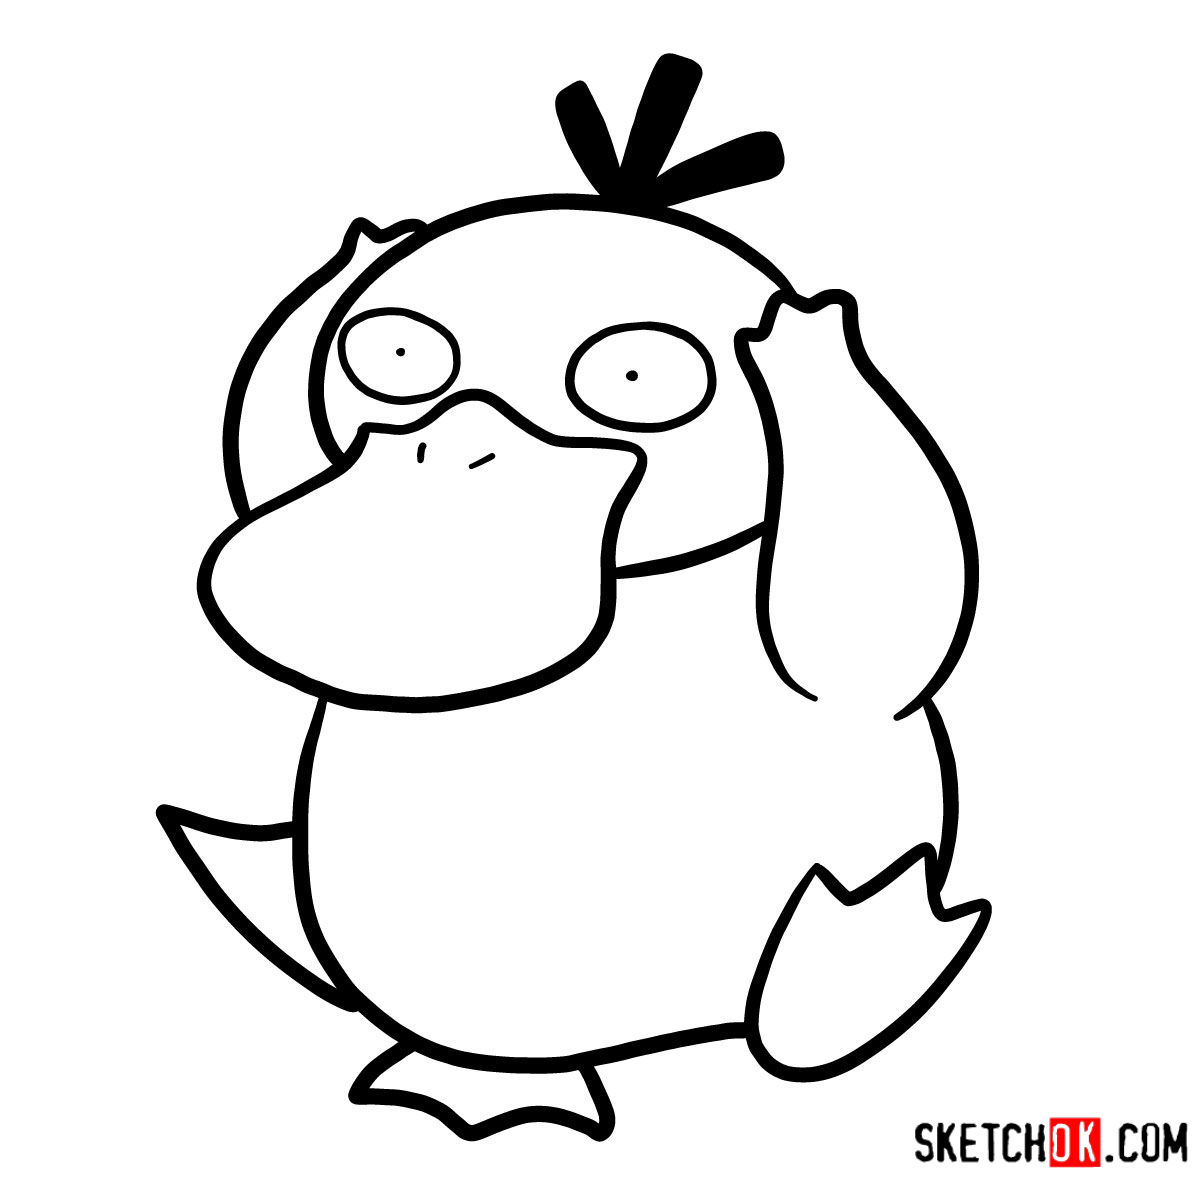 How to draw Psyduck | Pokemon - Step by step drawing tutorials